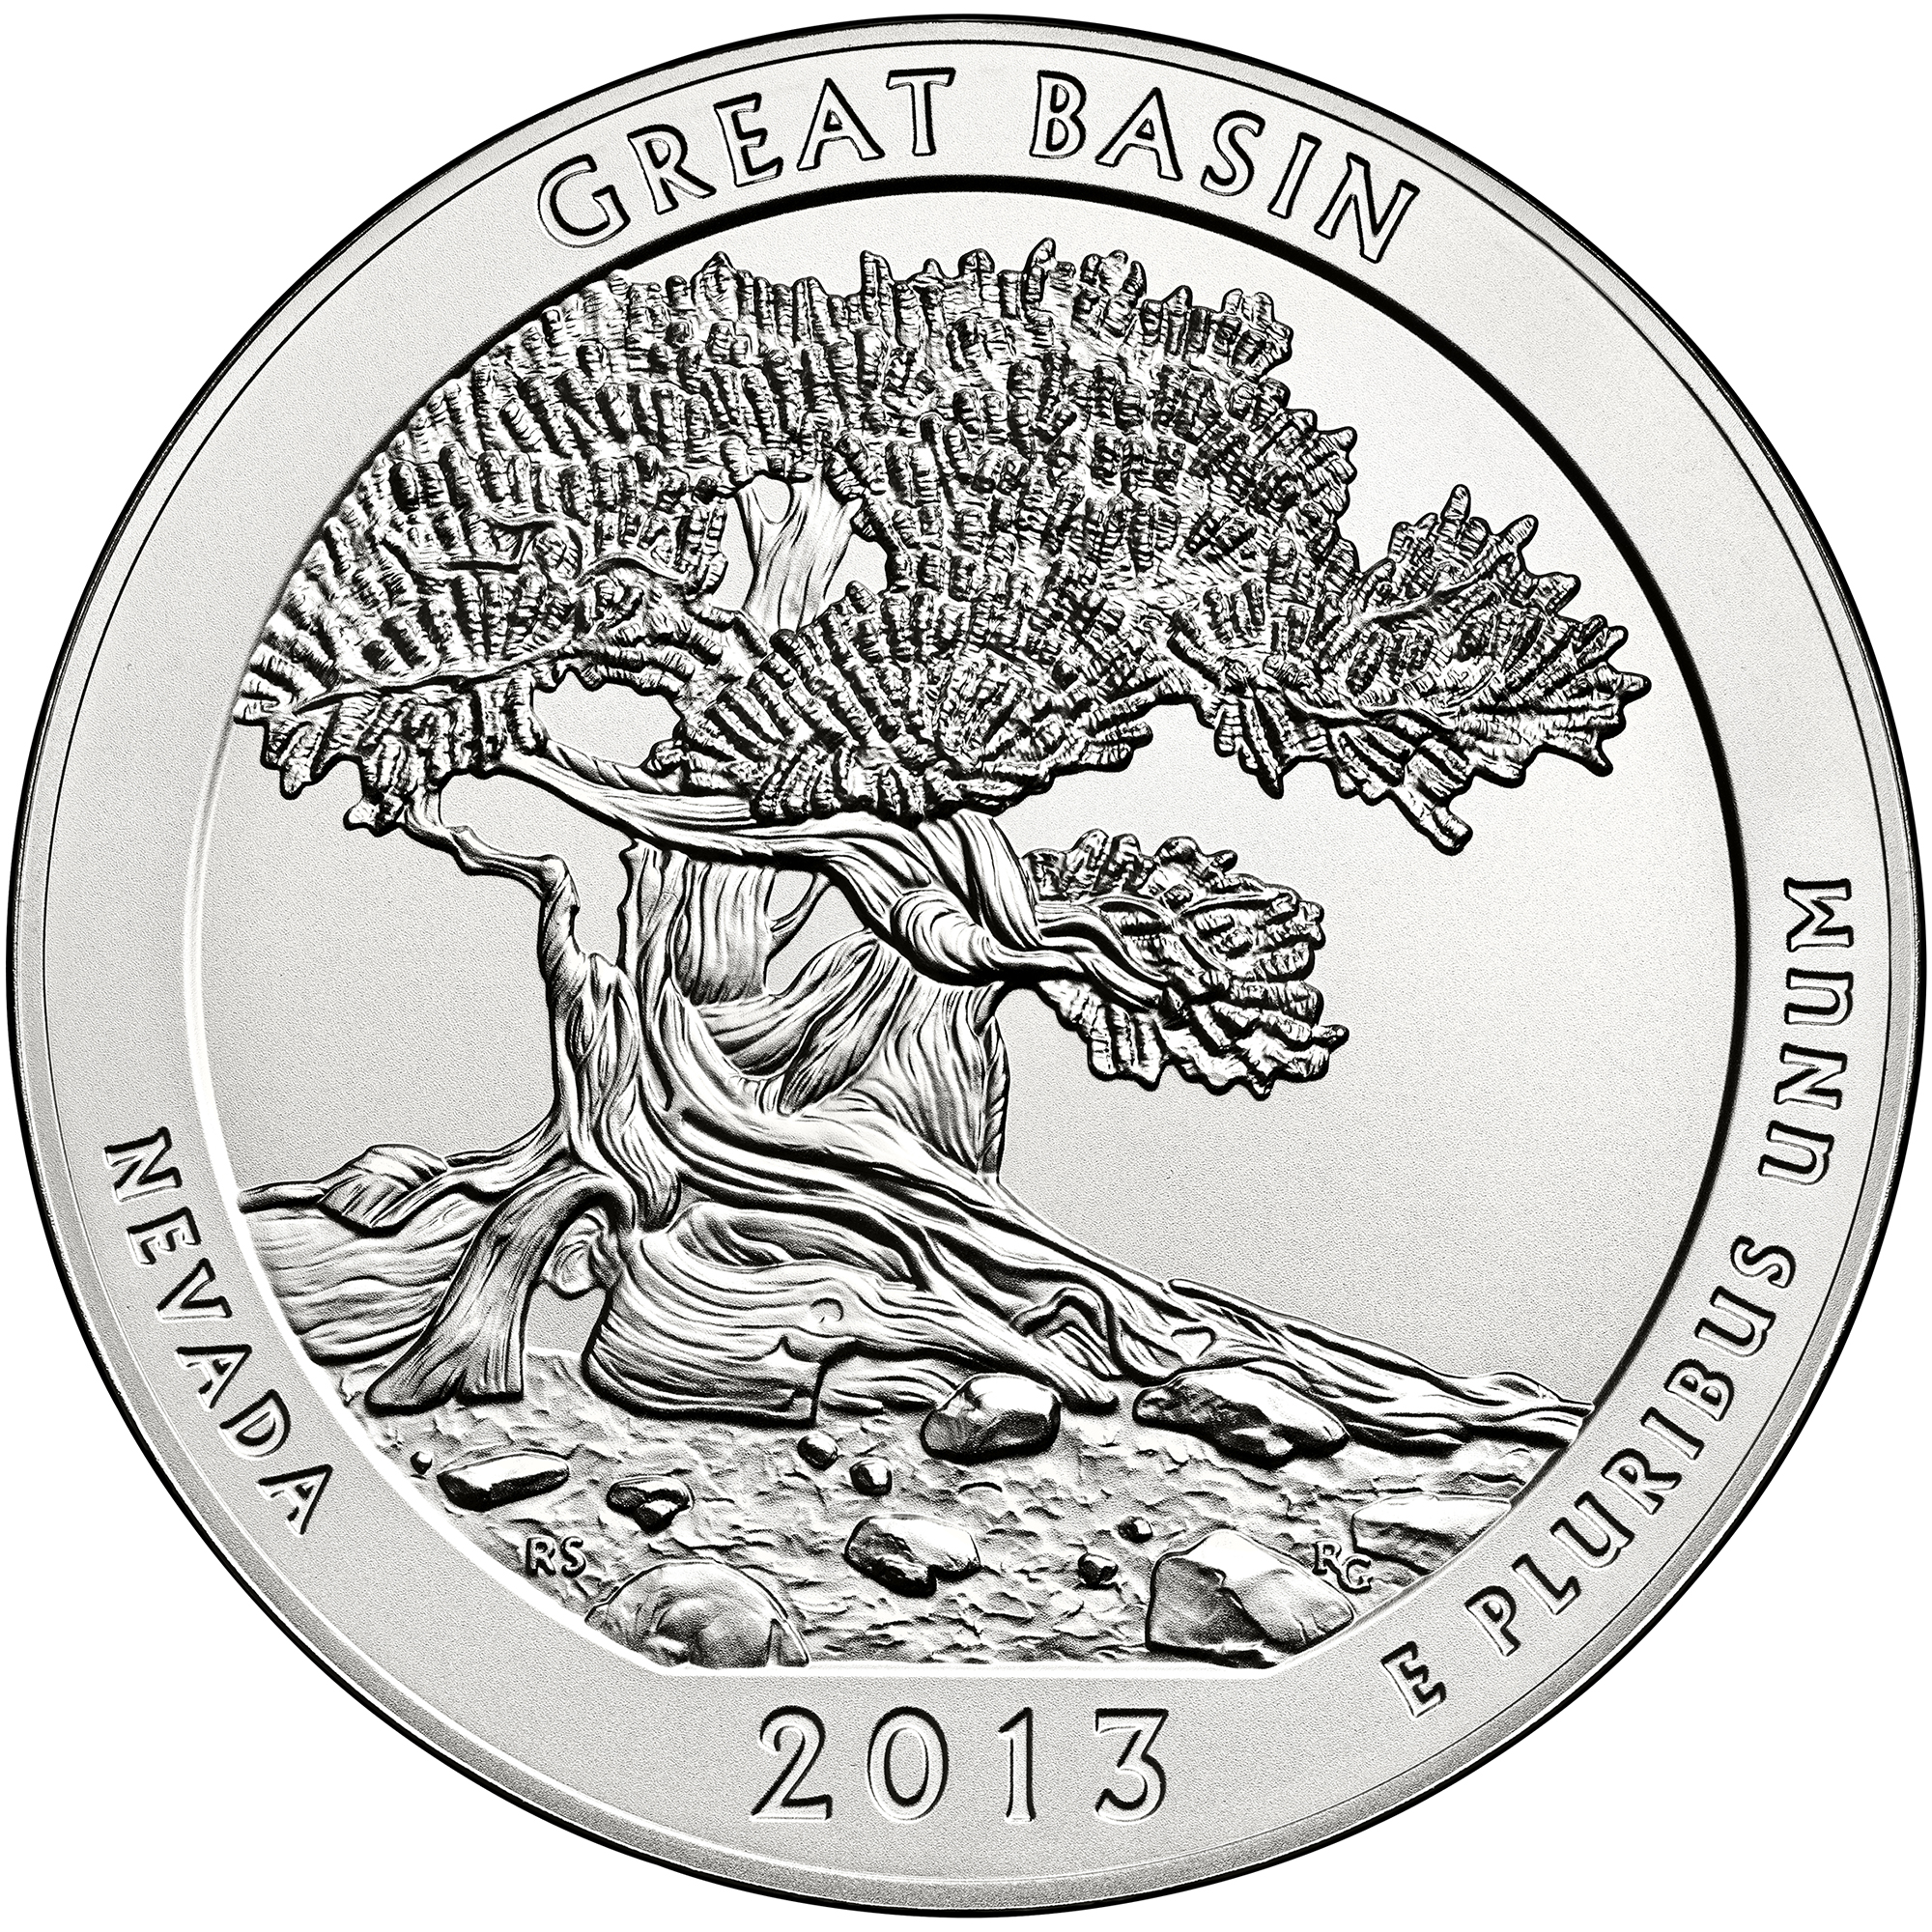 2013 America The Beautiful Quarters Five Ounce Silver Uncirculated Coin Great Basin Nevada Reverse